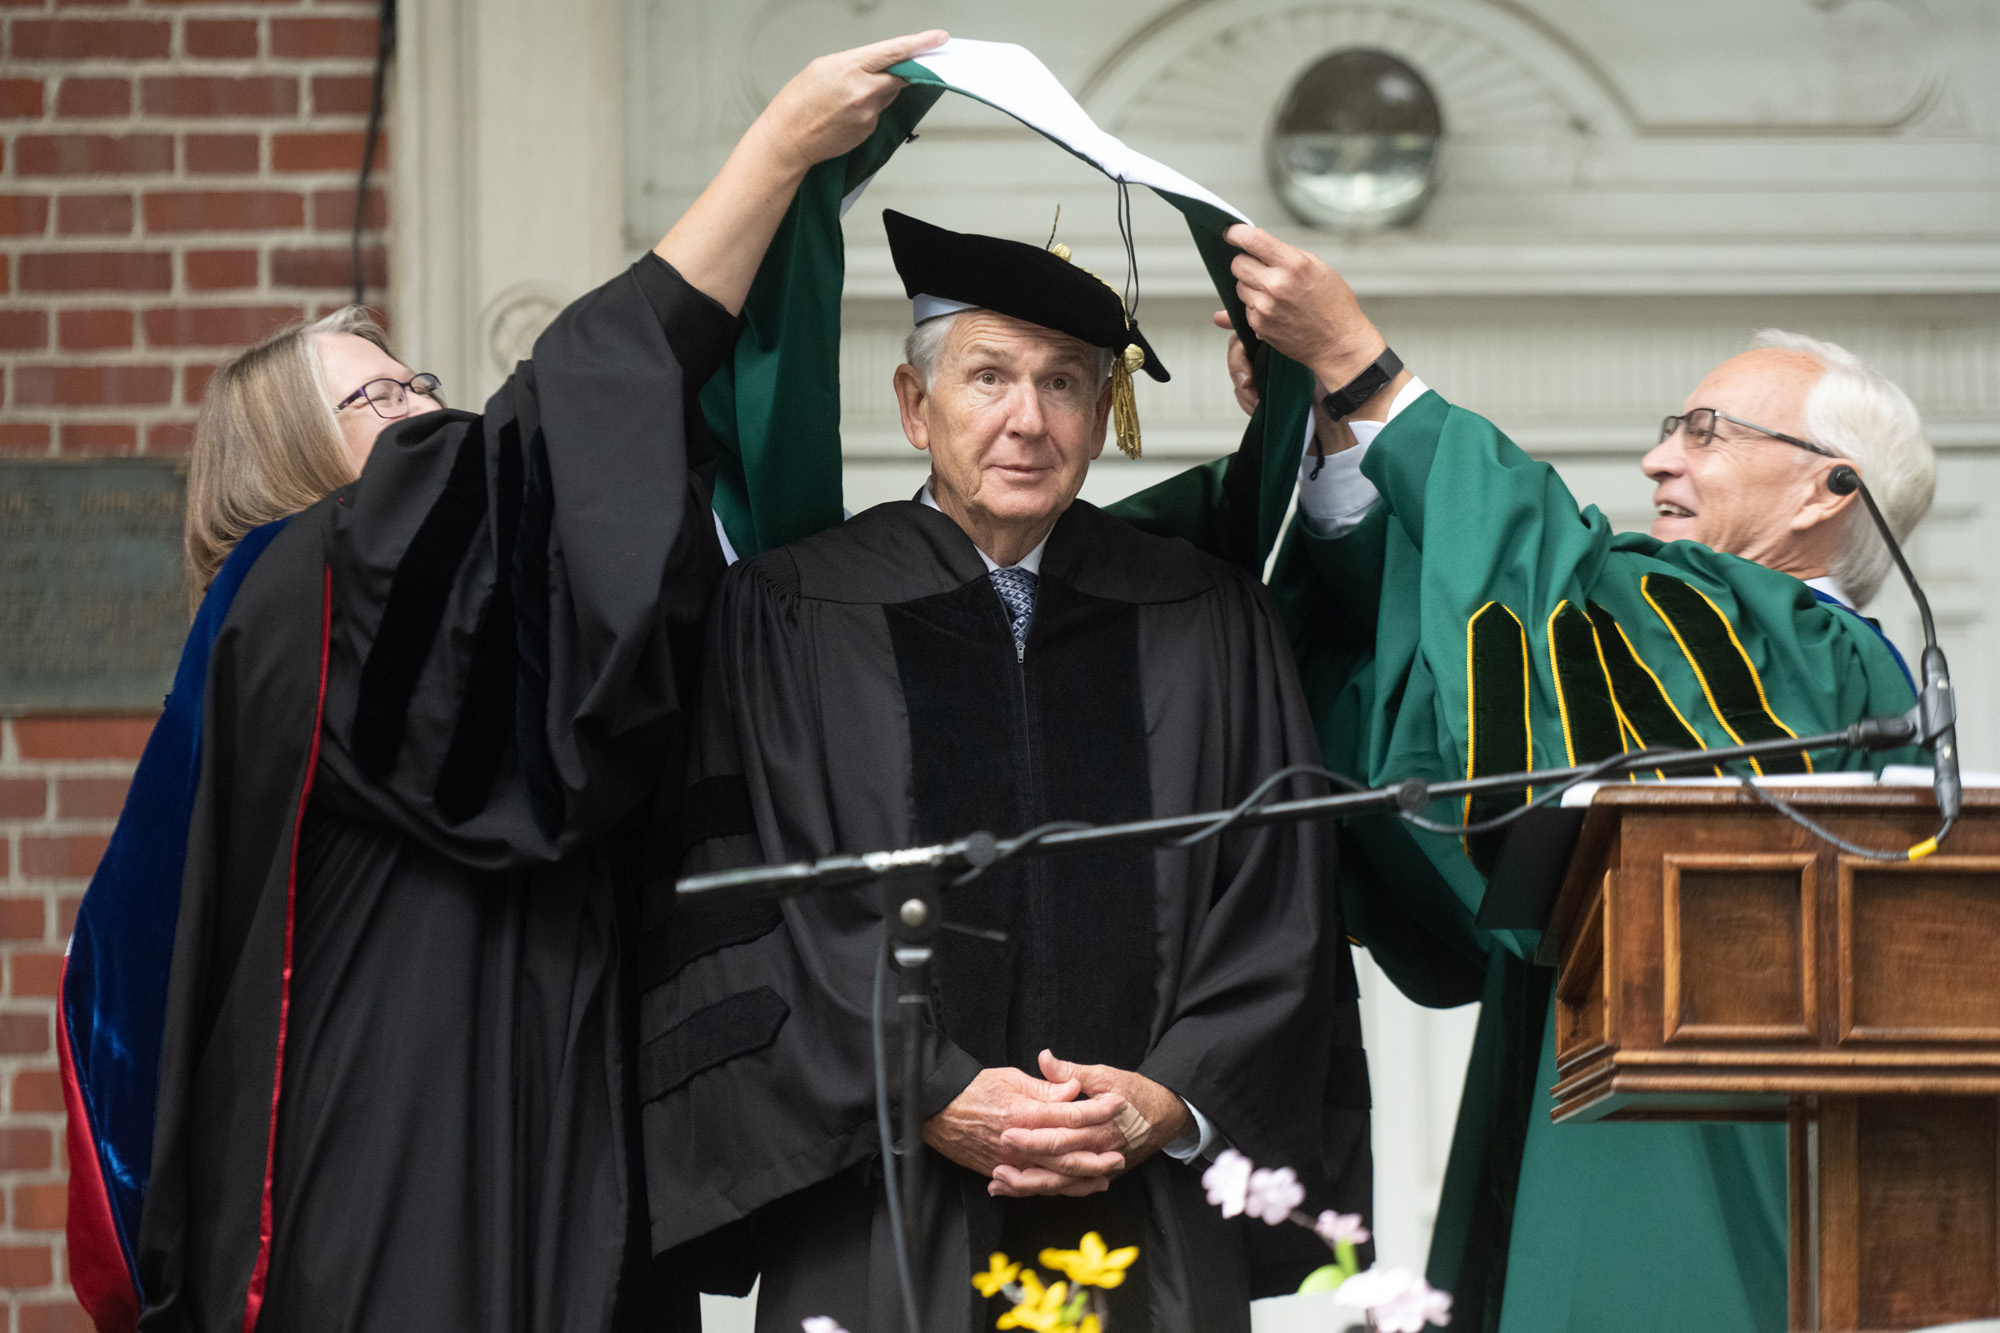 An honorary degree recipient, Richard Vincent, is presented with a neck sash by President Sherman